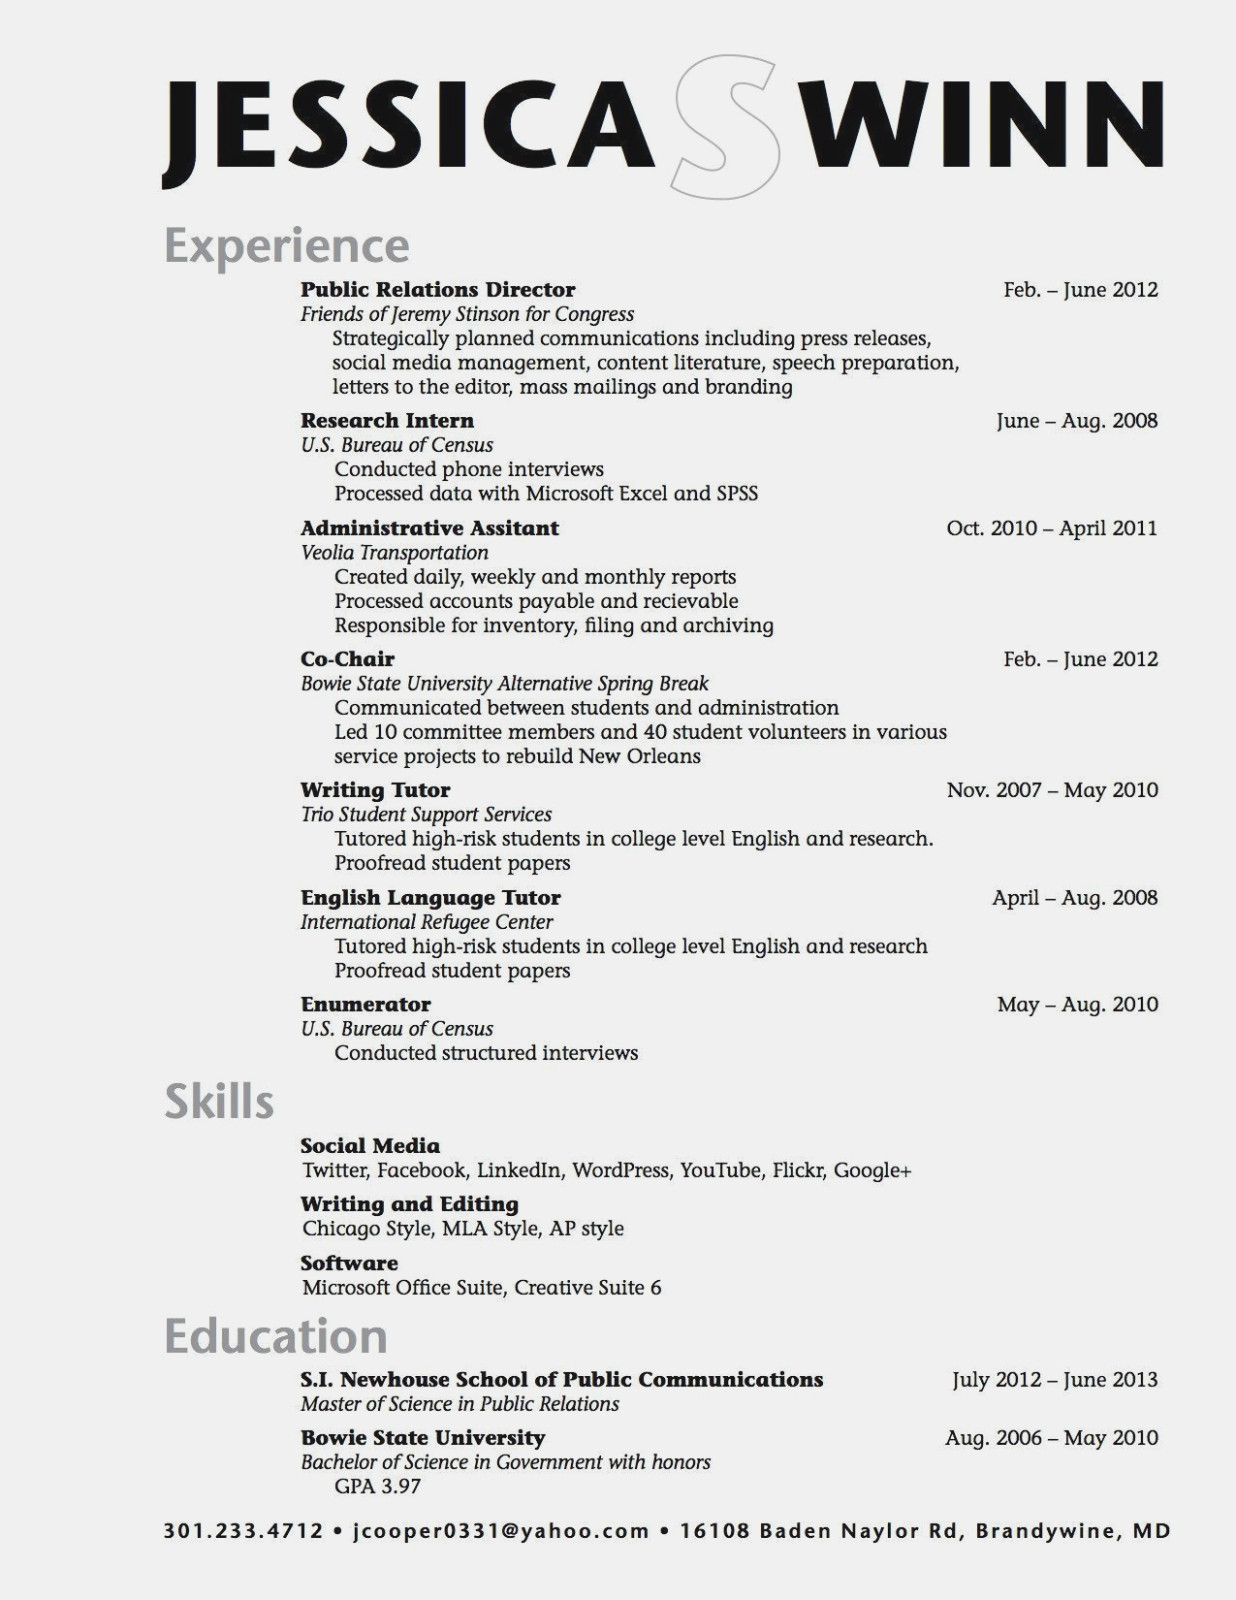 Resume writing for high school students college applications